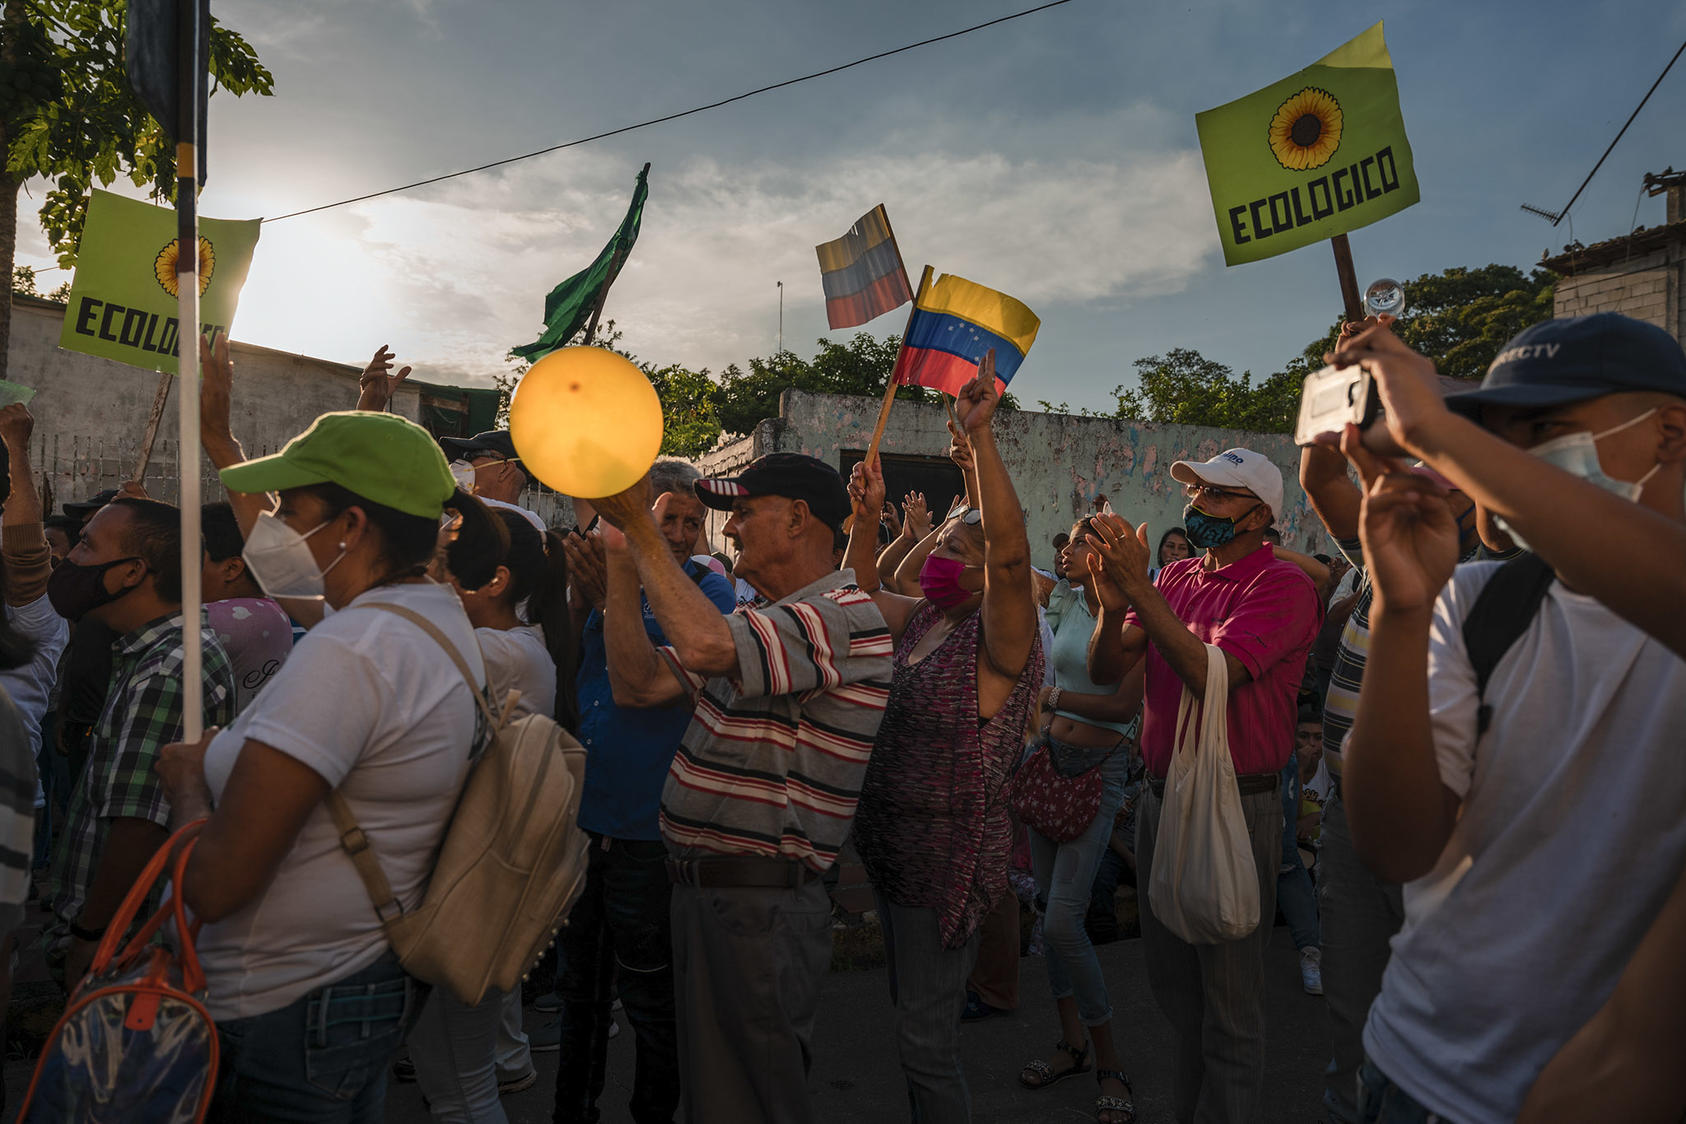 Venezuelans in Bolivar state applaud a speech by Americo De Grazia, an opposition candidate for governor, on November 13. Much of Venezuela’s opposition reversed its recent strategy of boycotting elections. (Adriana Loureiro Fernandez/The New York Times)